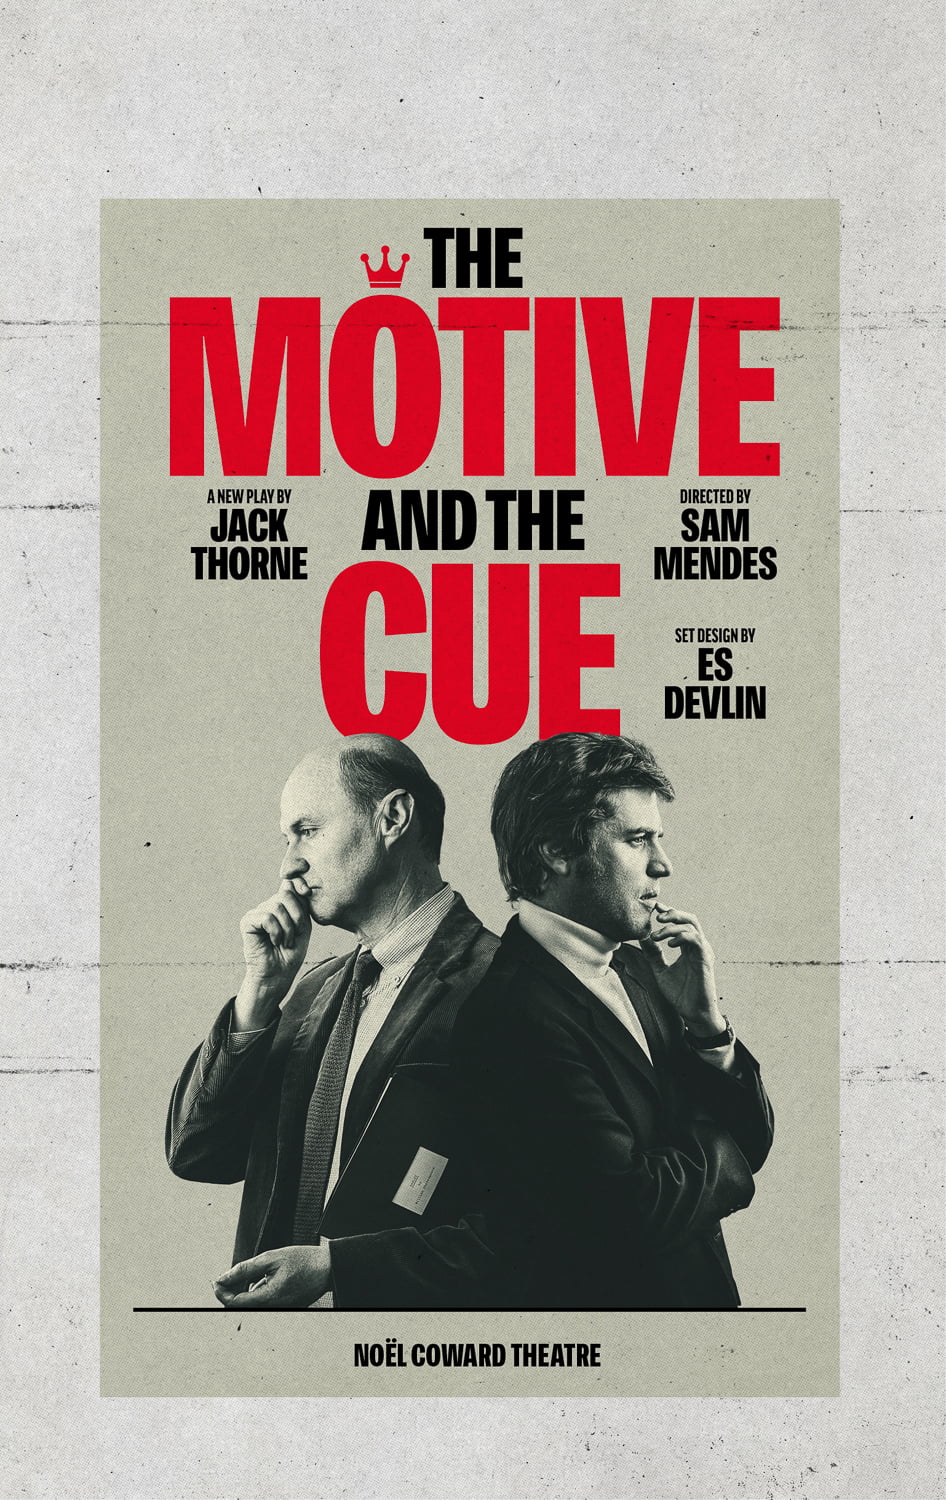 The cast of The Motive and The Cue, the hit National Theatre show